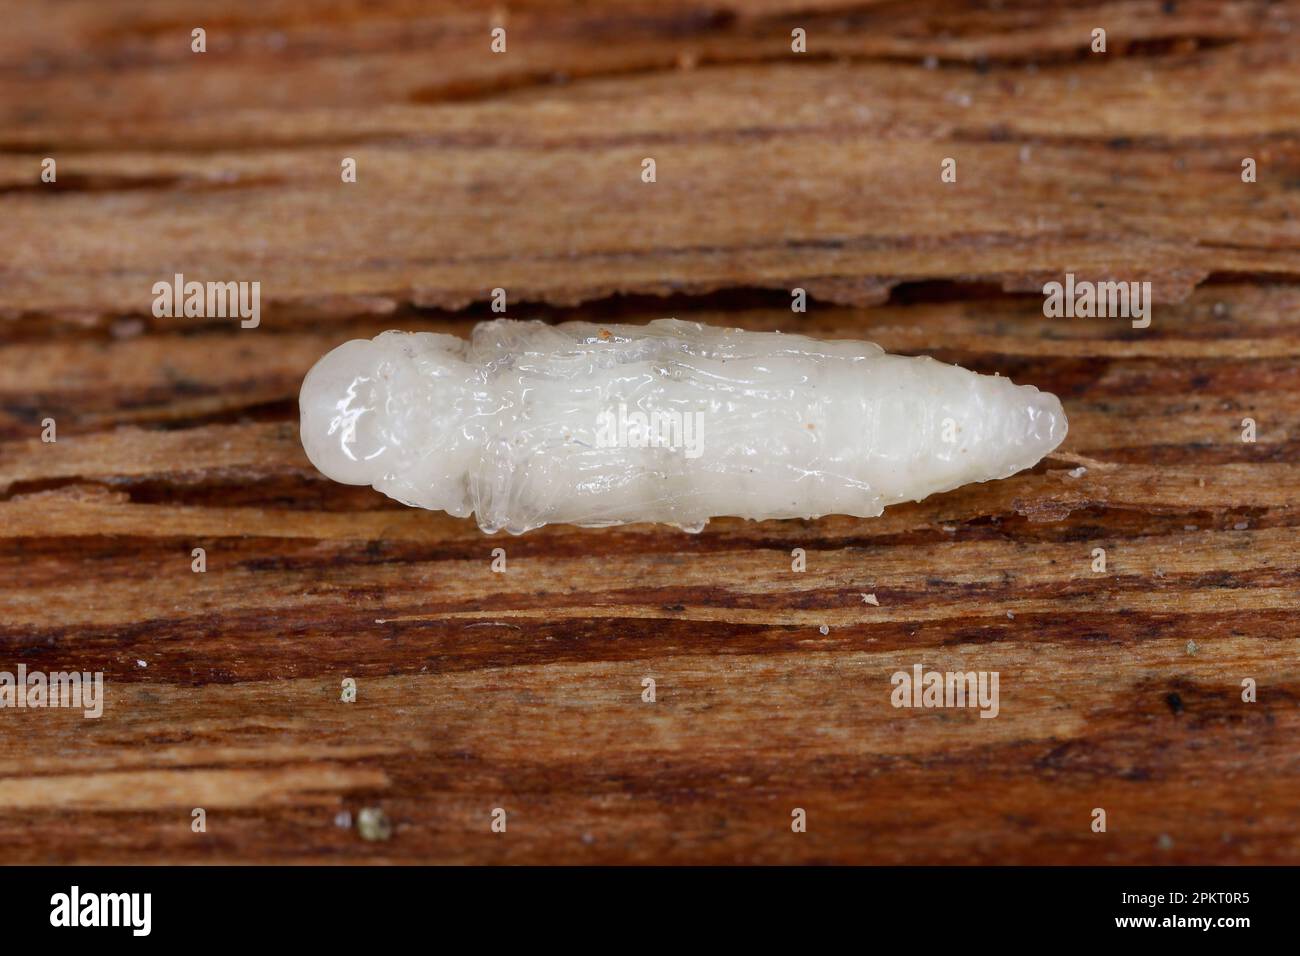 Developmental stage - pupa, a beetle of the family Buprestidae (jewel beetles) of the genus Agrilus found under the bark. Stock Photo